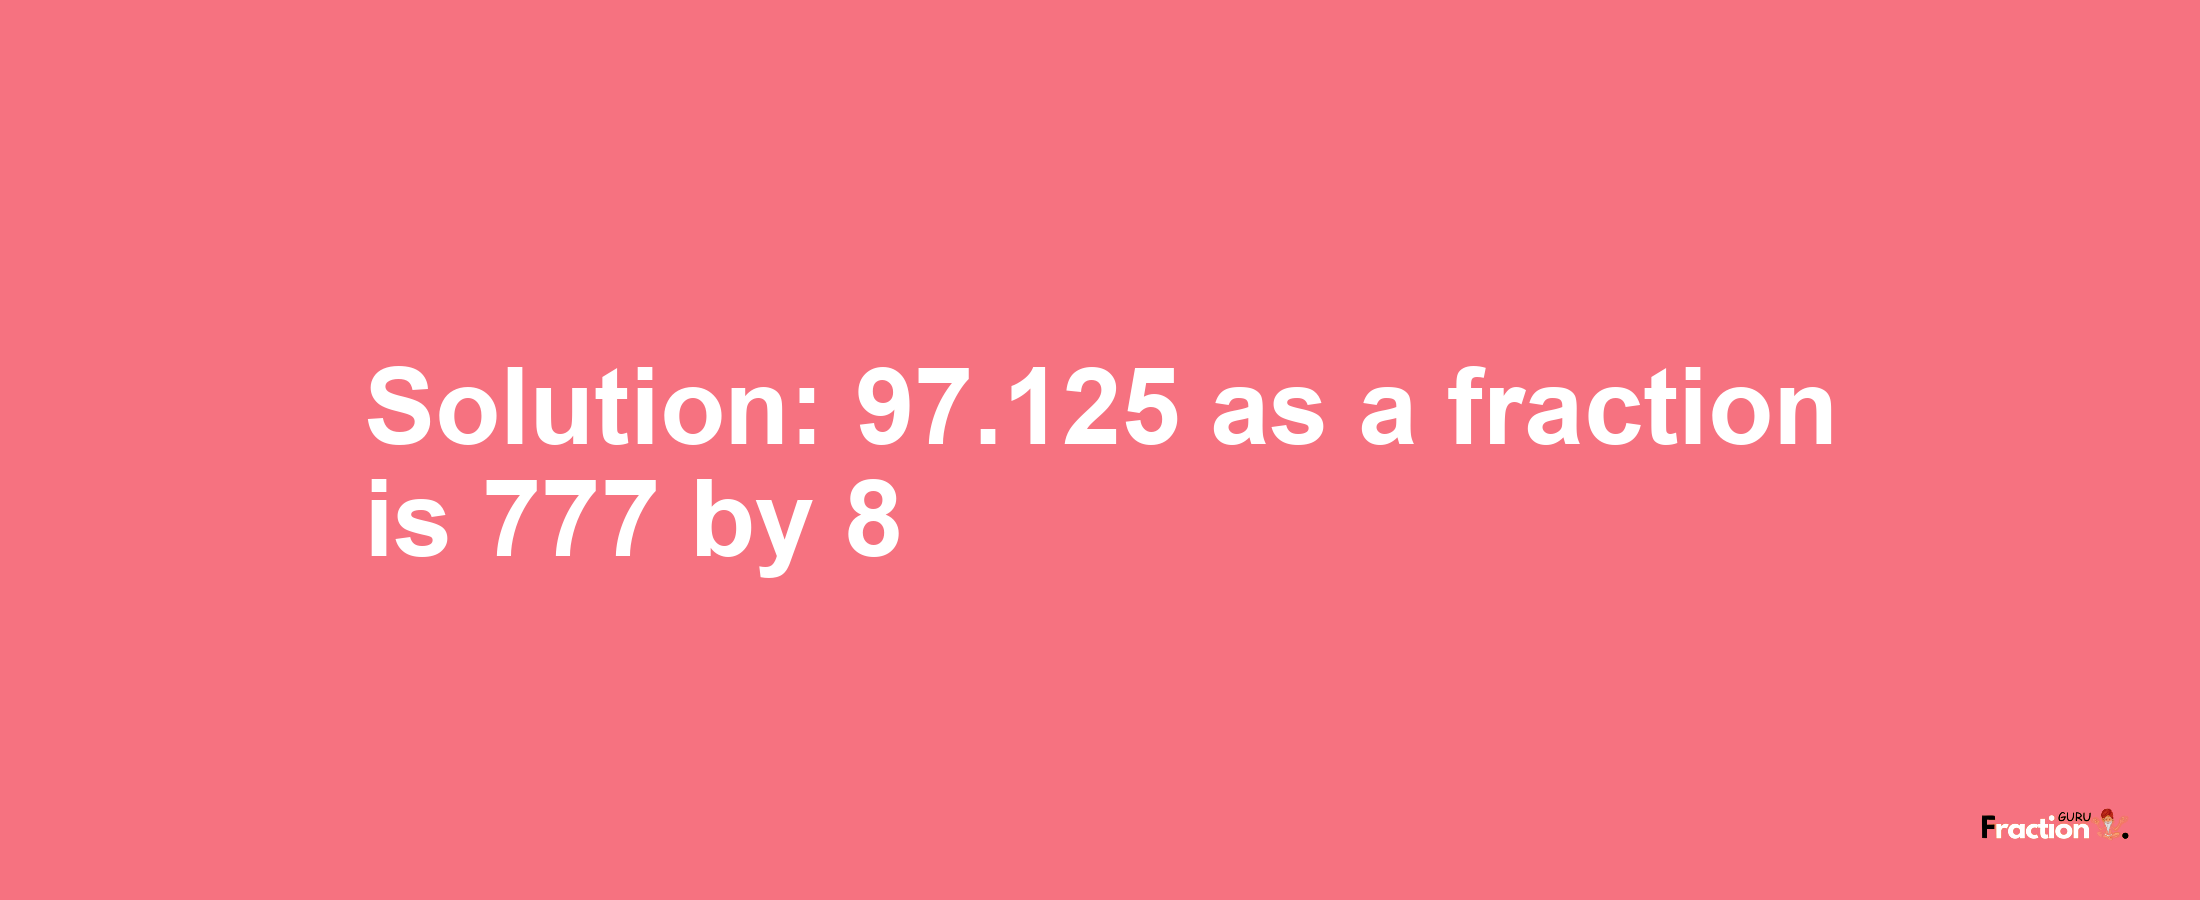 Solution:97.125 as a fraction is 777/8